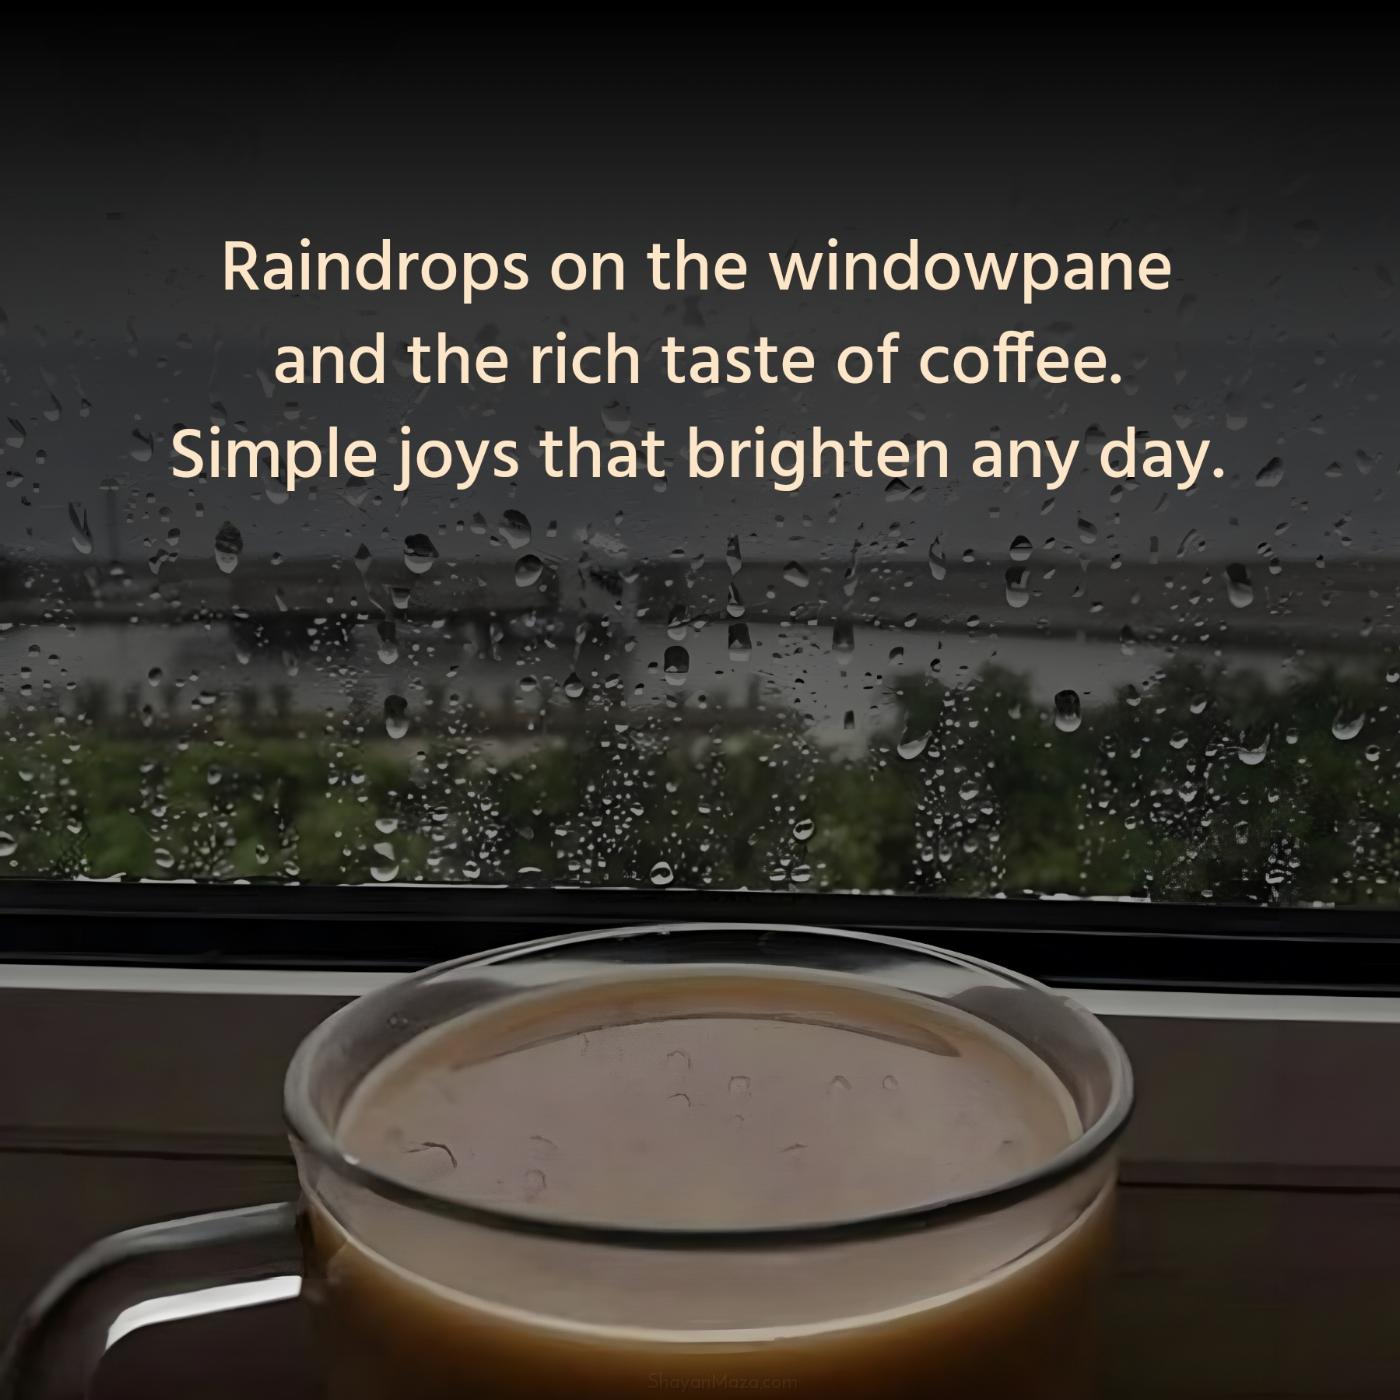 Raindrops on the windowpane and the rich taste of coffee